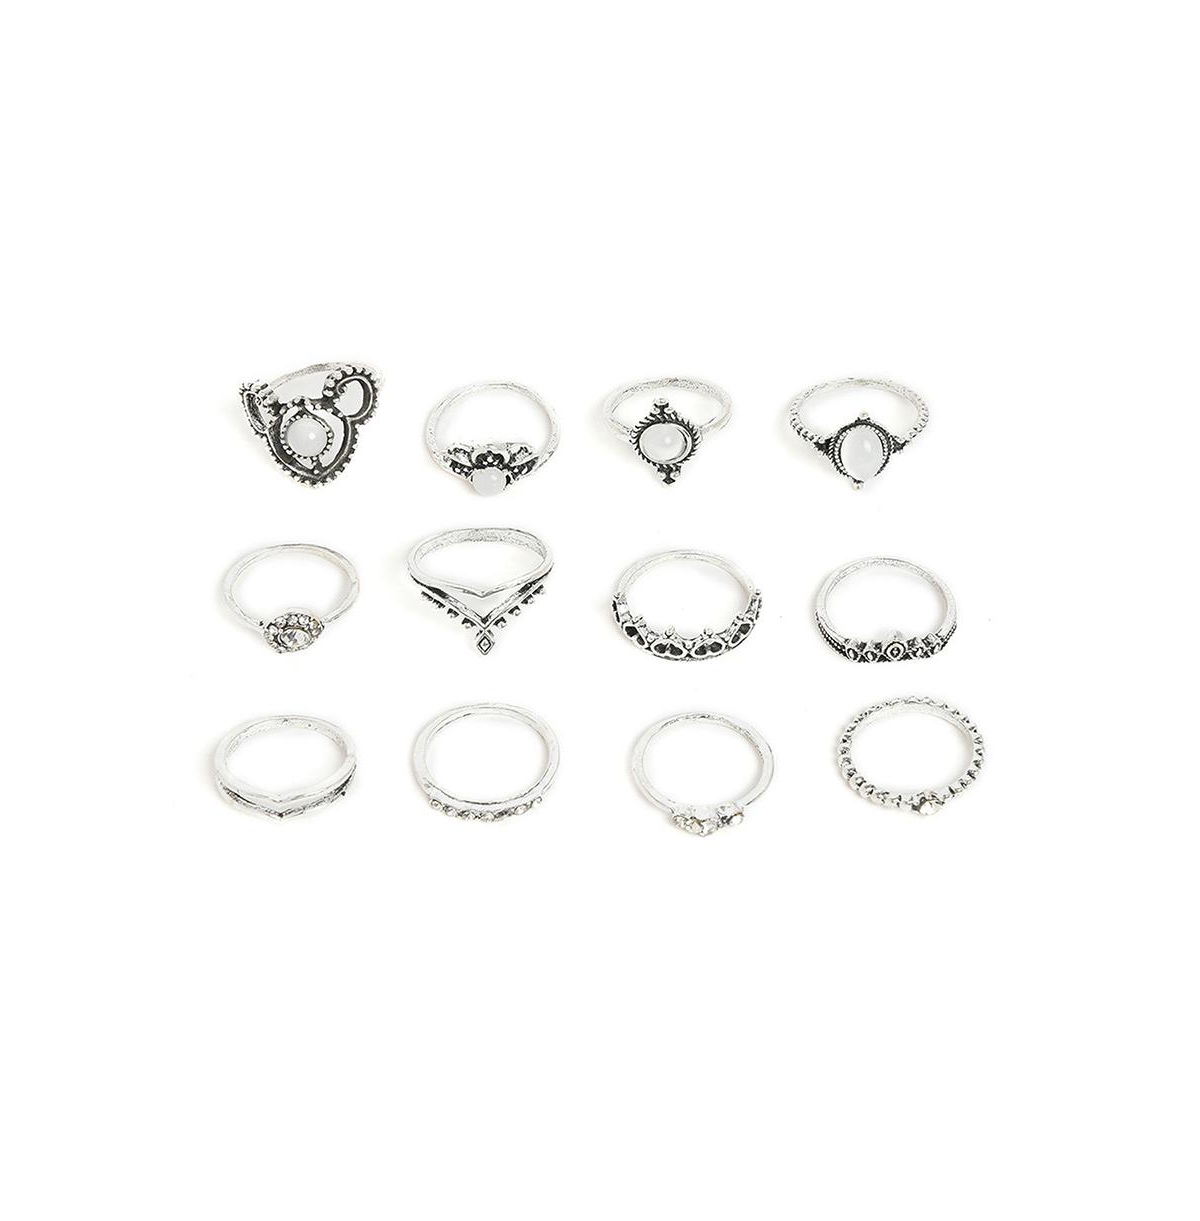 Women's Silver Pack Of 12 Oxidized Rings - Silver